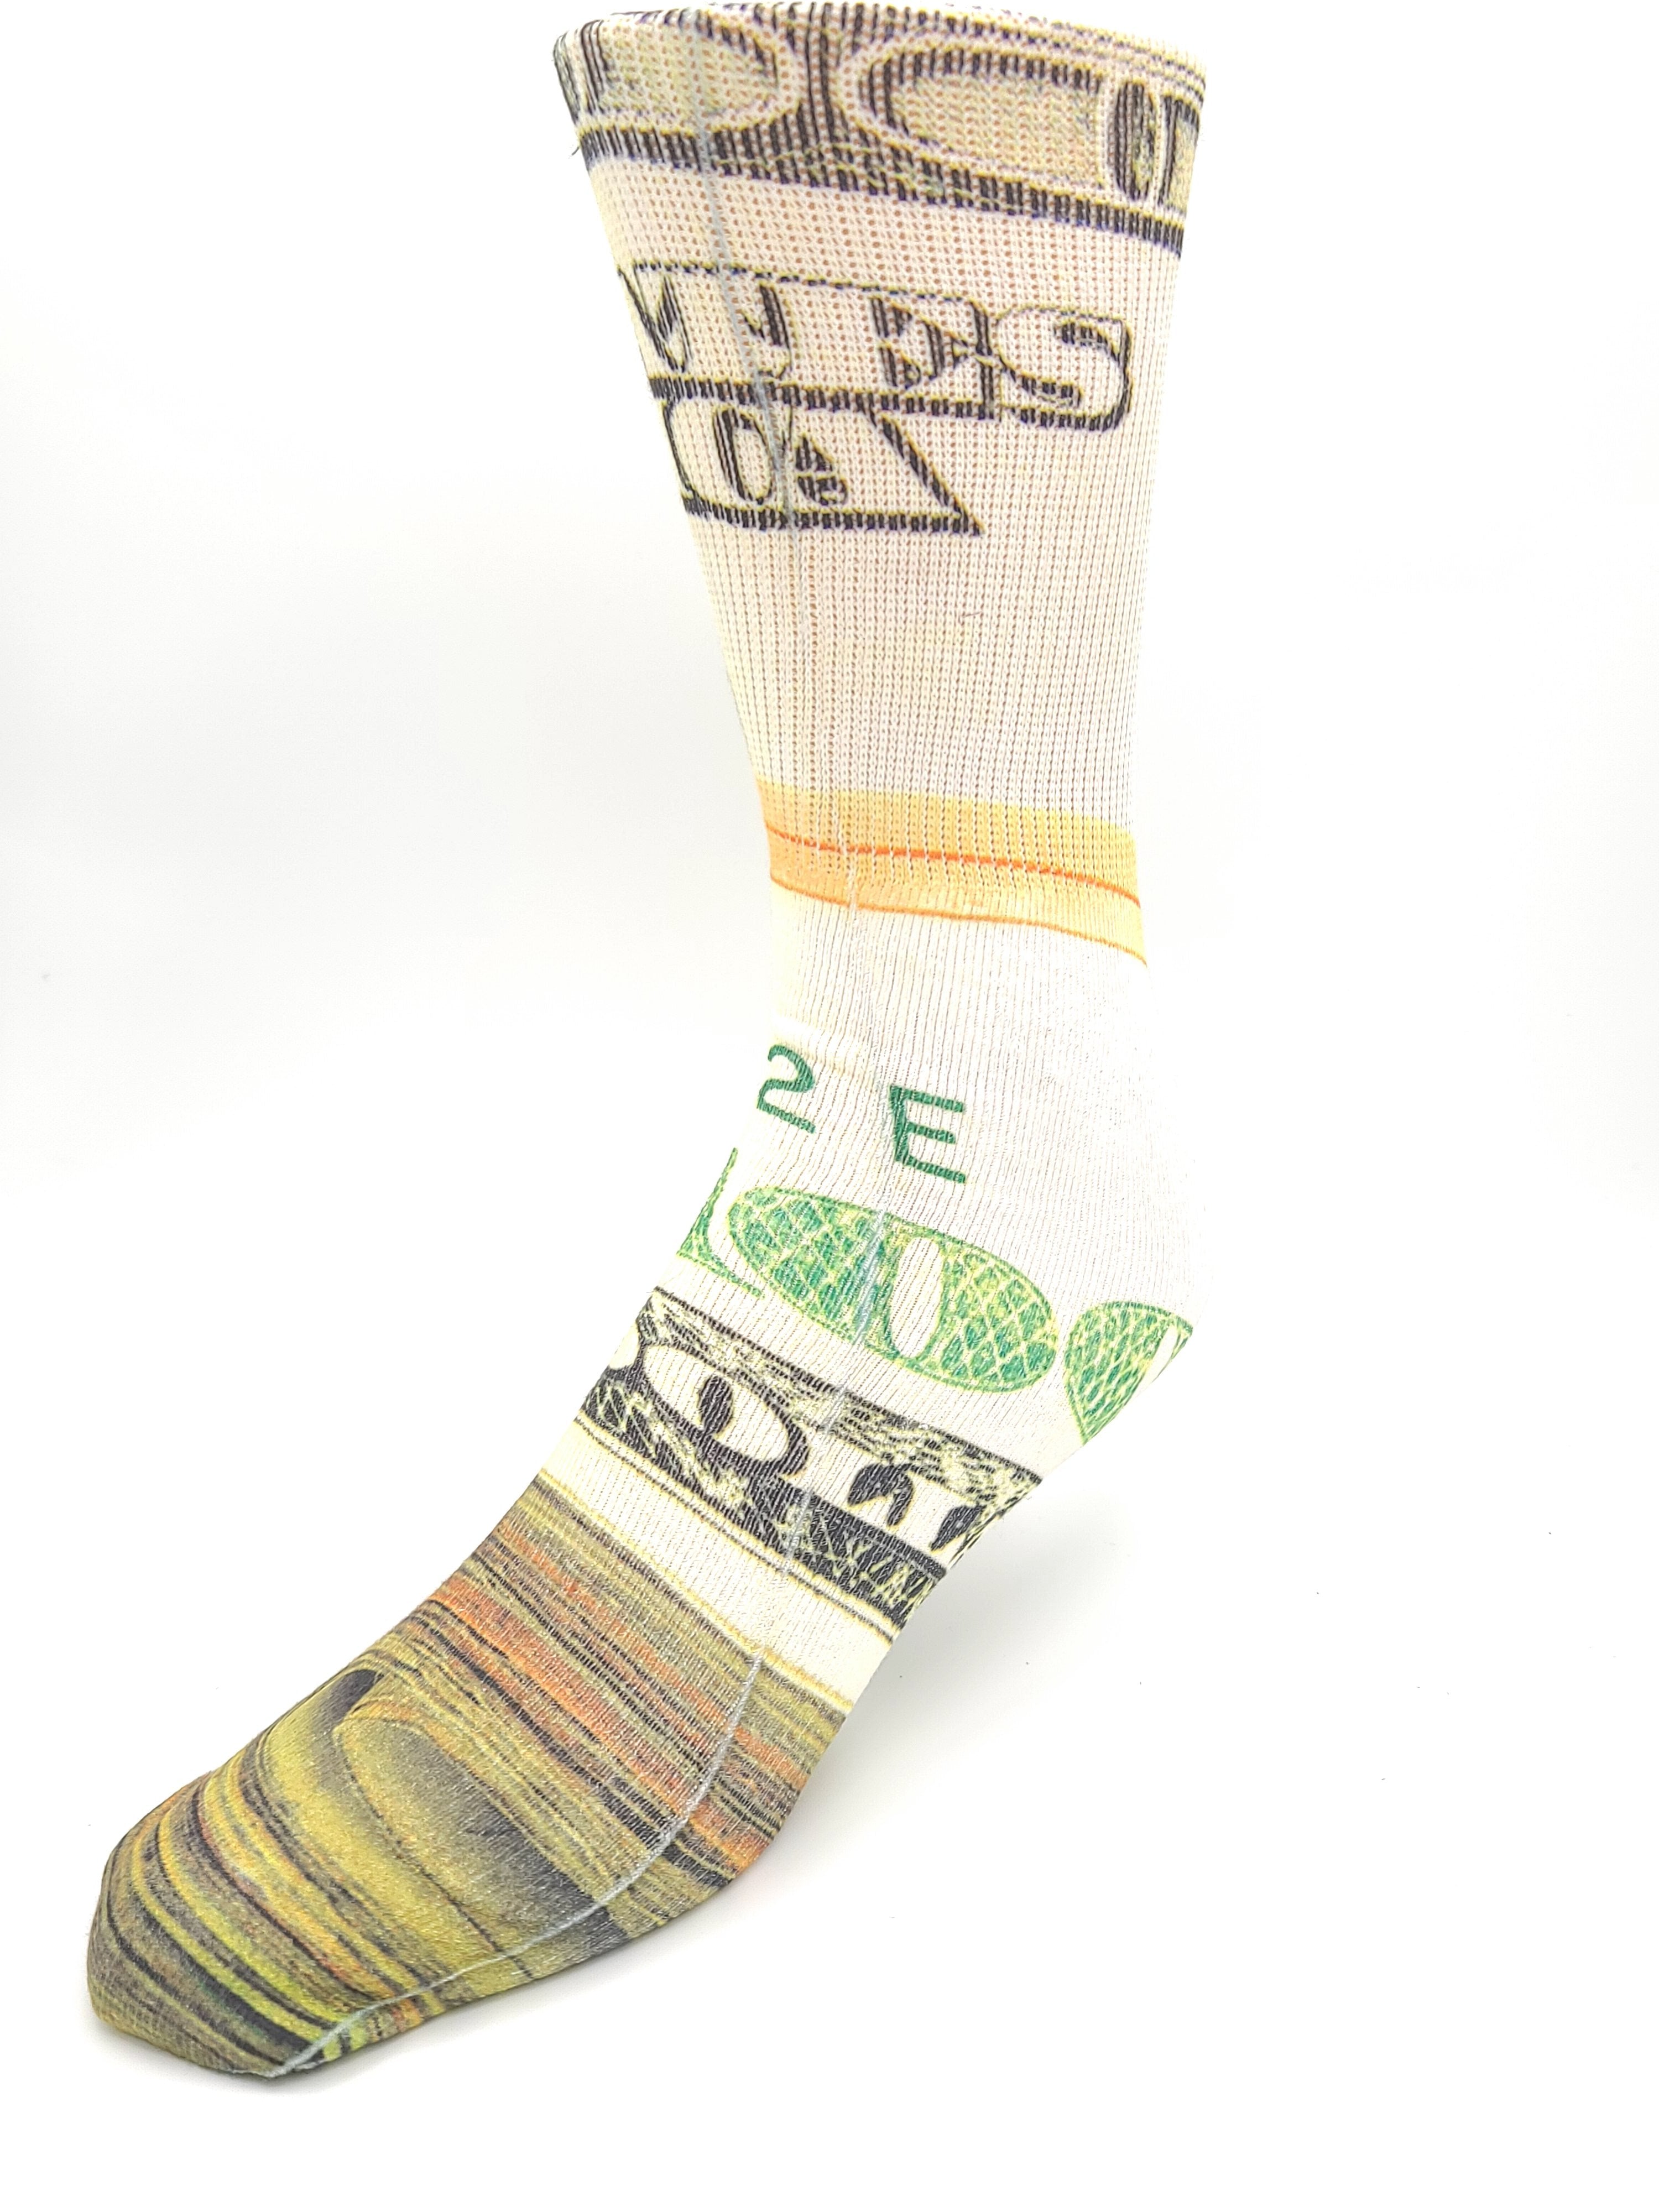 TOE SOCKS FOUR PACK - OUR MOST POPULAR!